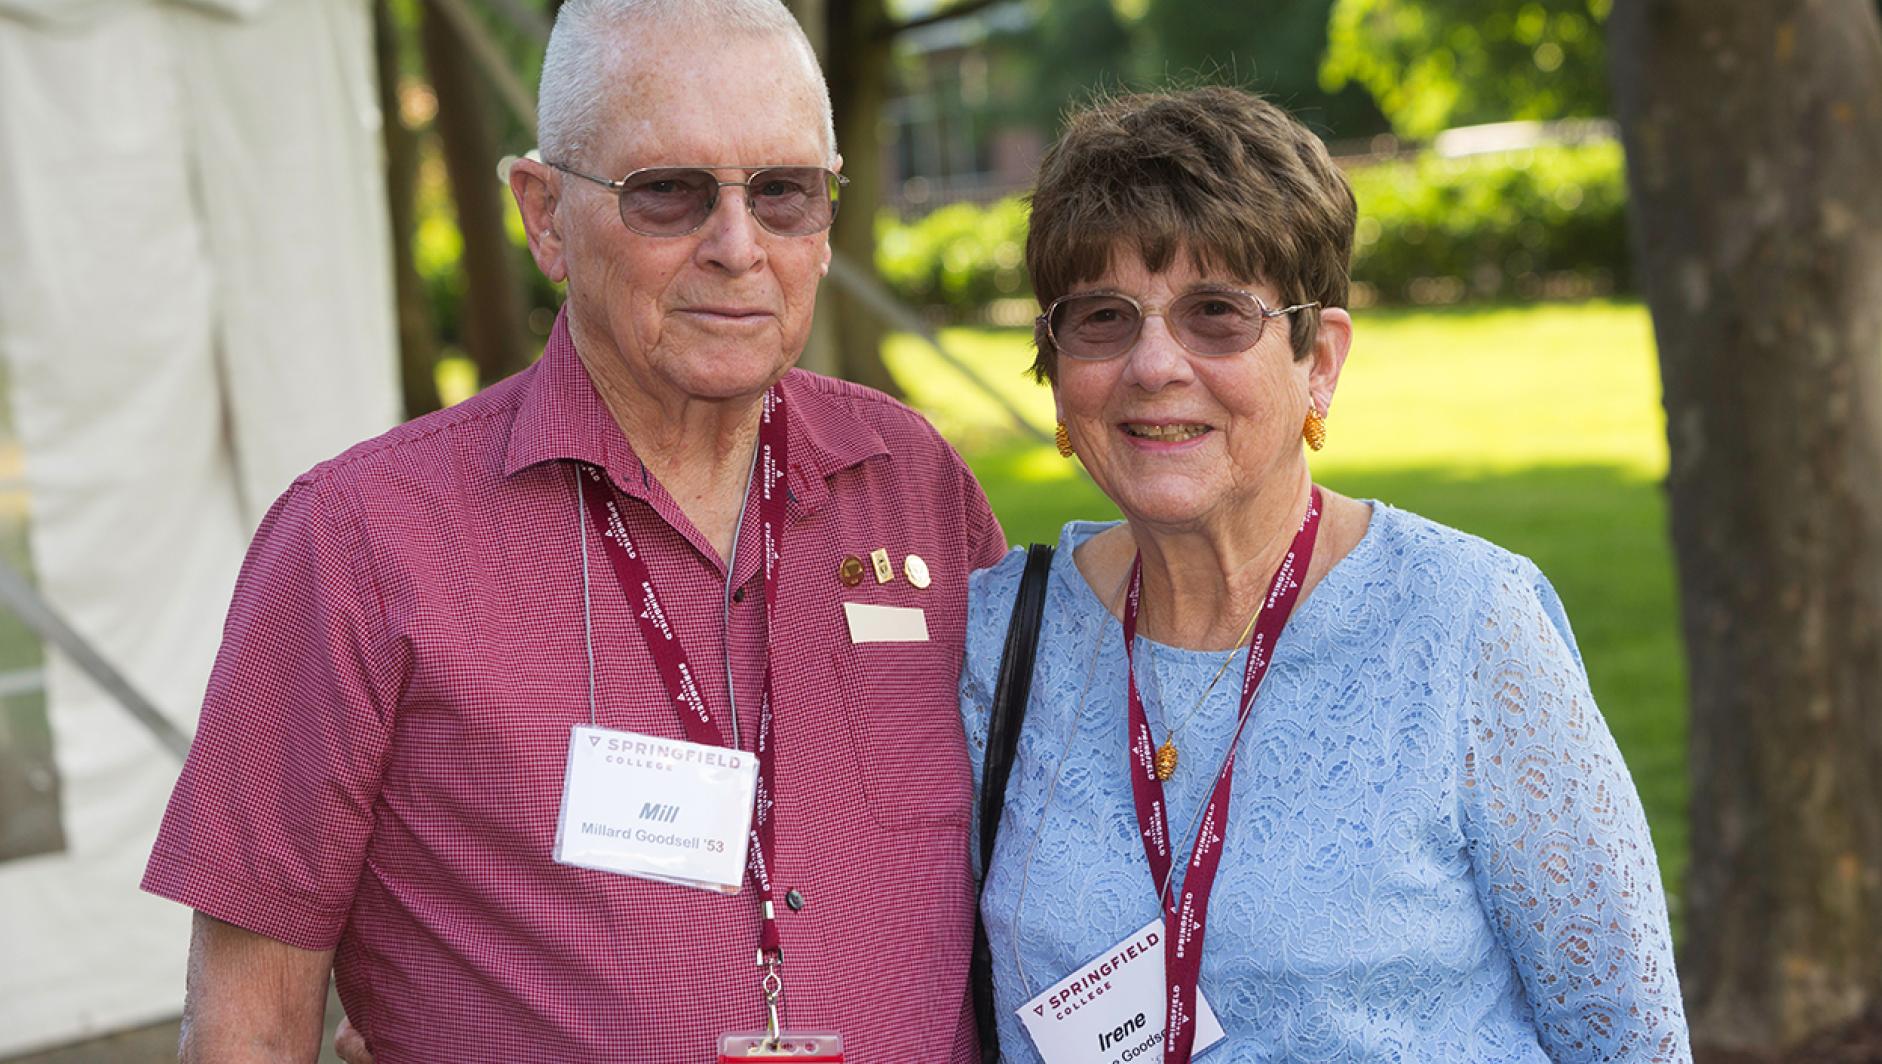 A husband and wife from the Class of 1953